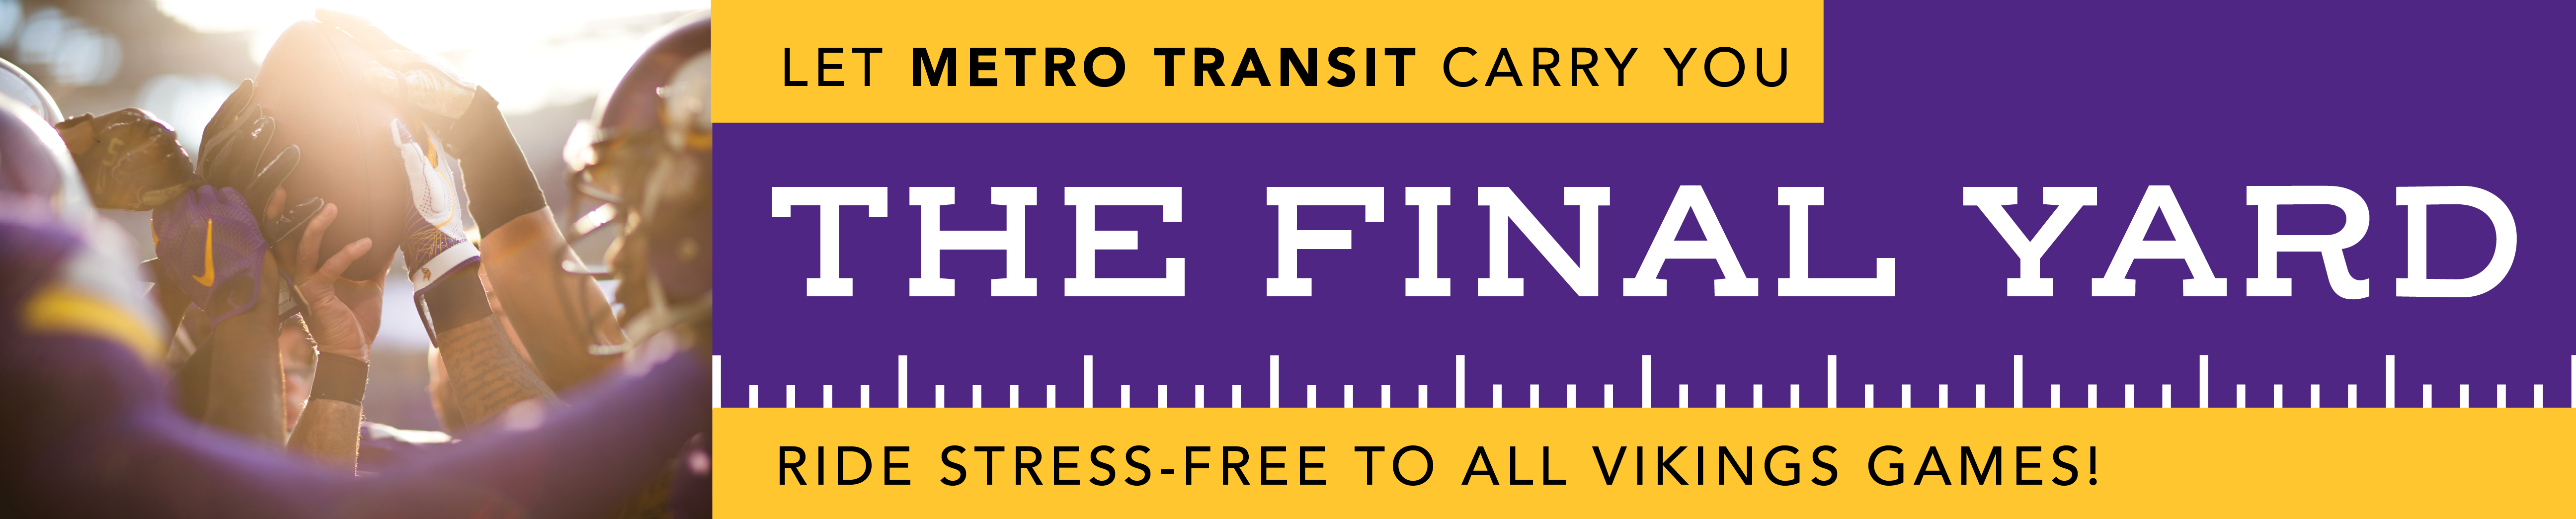 Let Metro Transit carry you the final yard